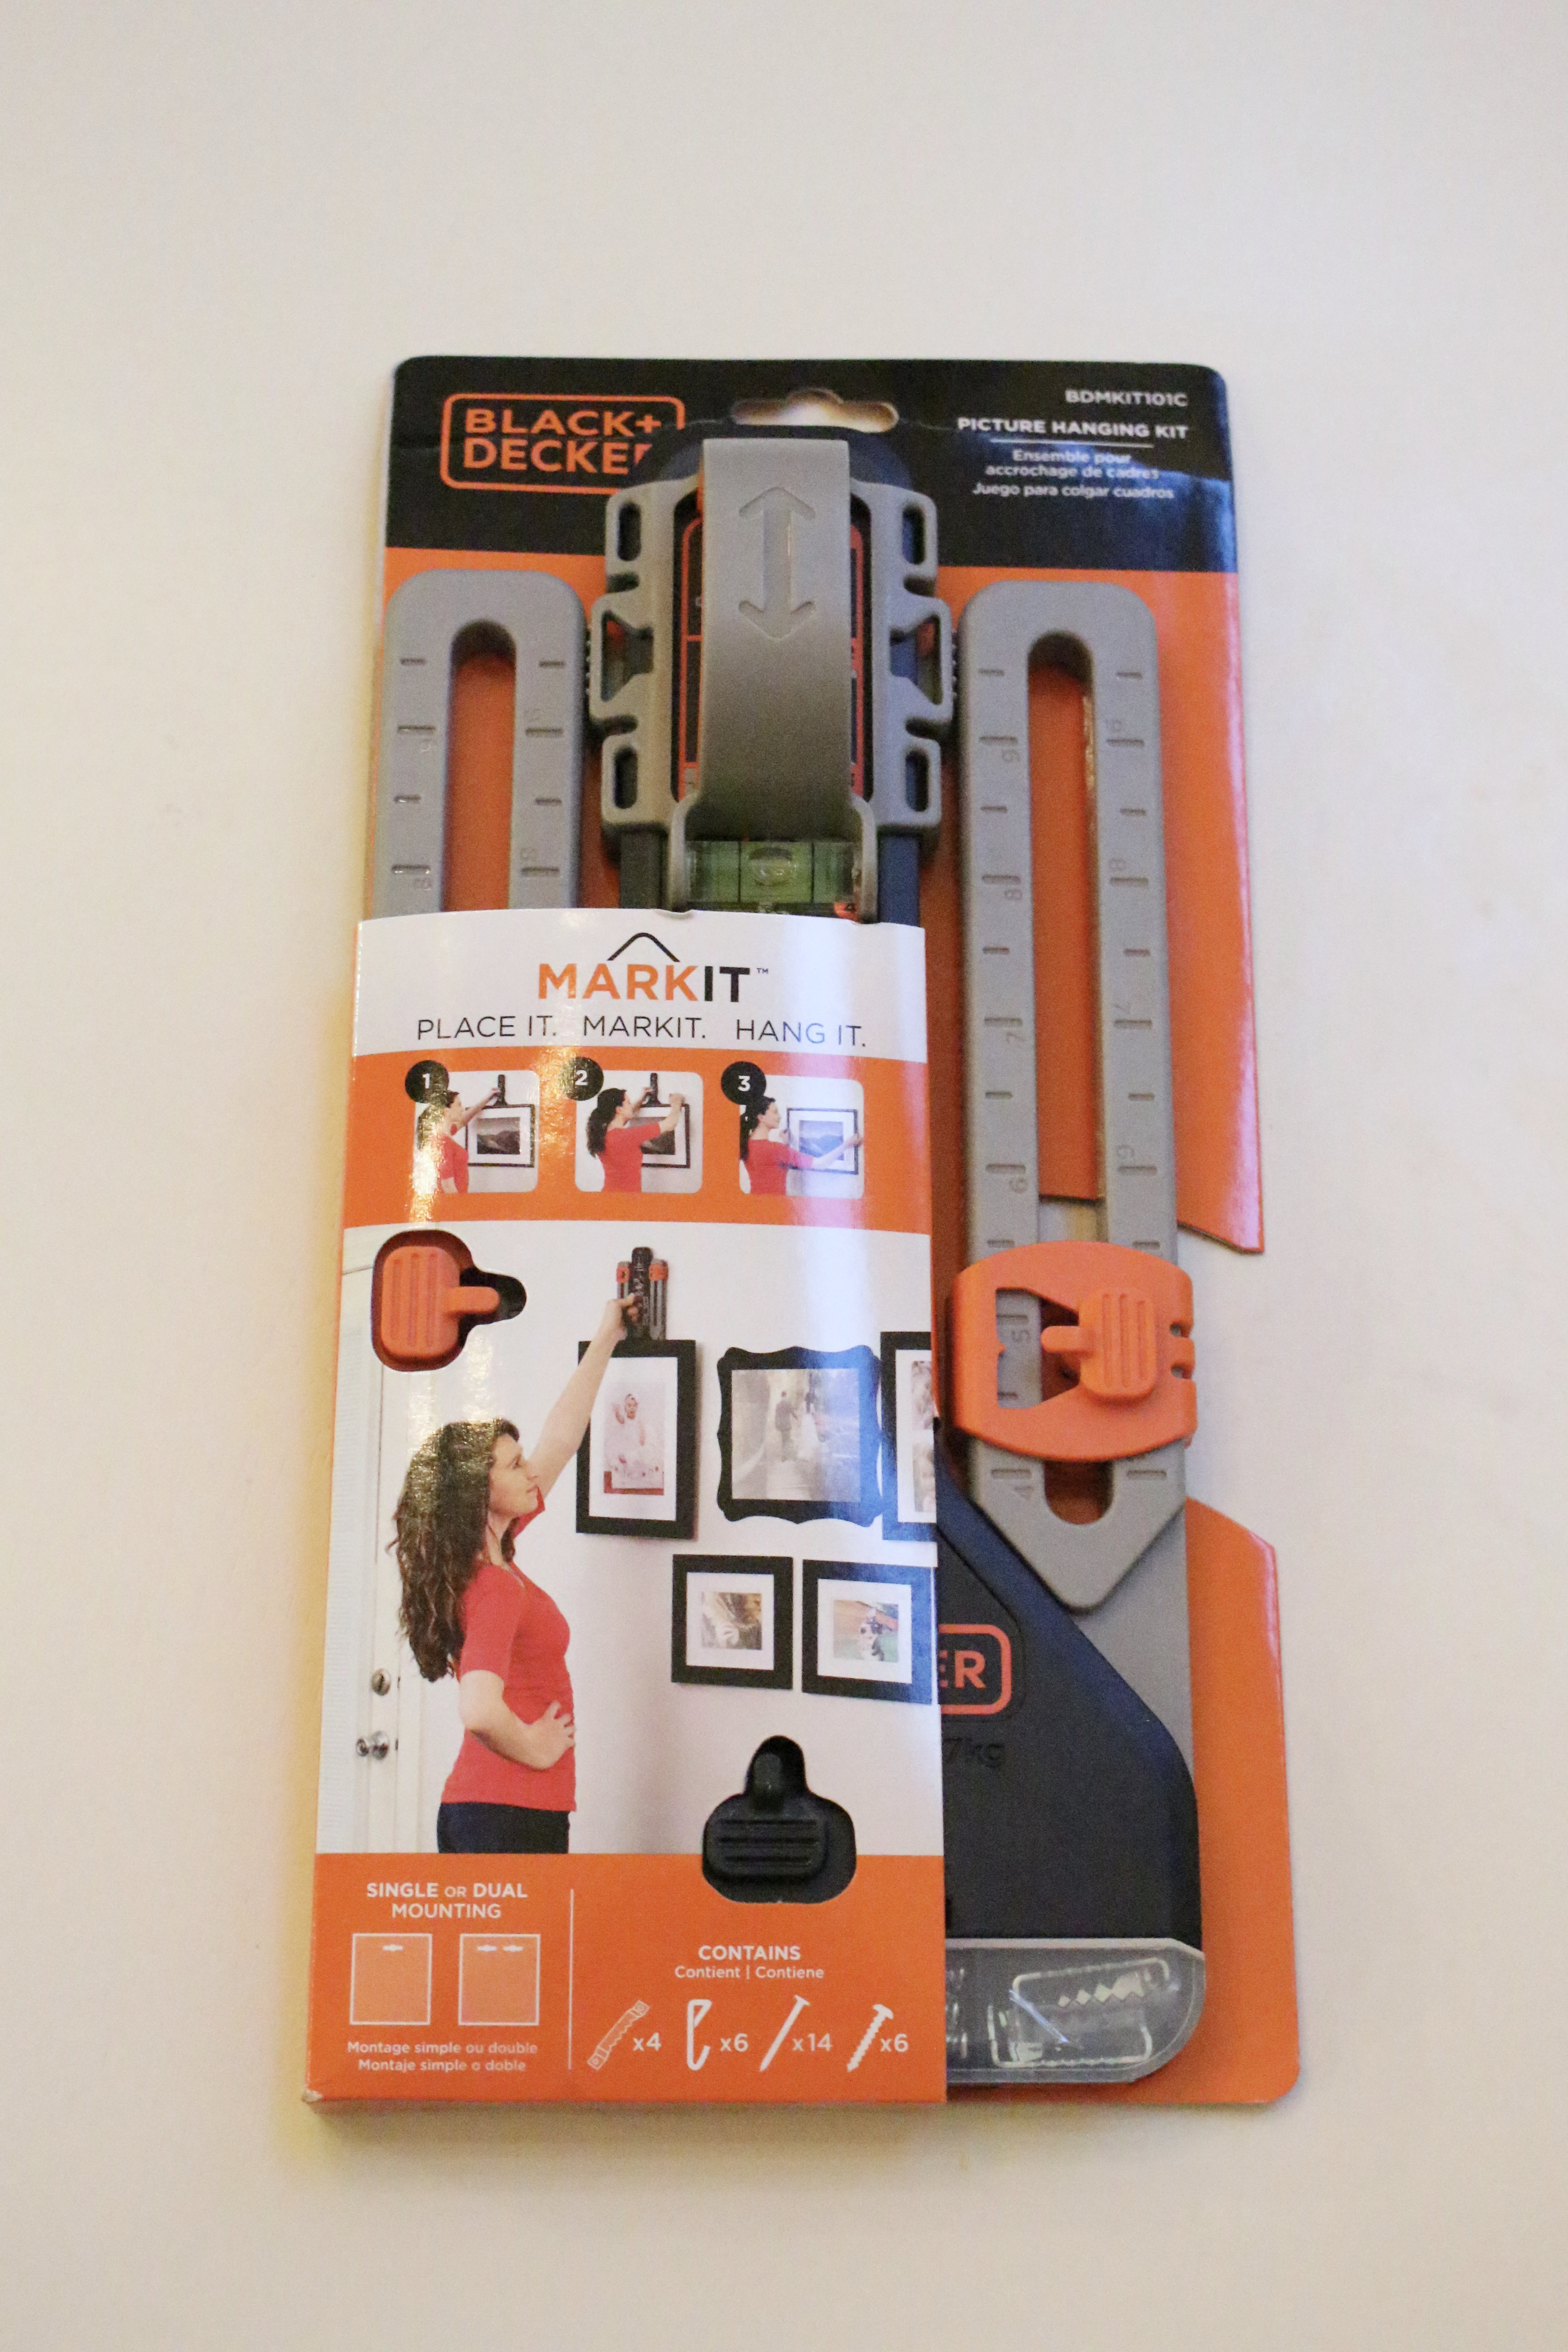 Black + Decker Markit Picture Hanging Tool, Tape & Picture Hangers, Household